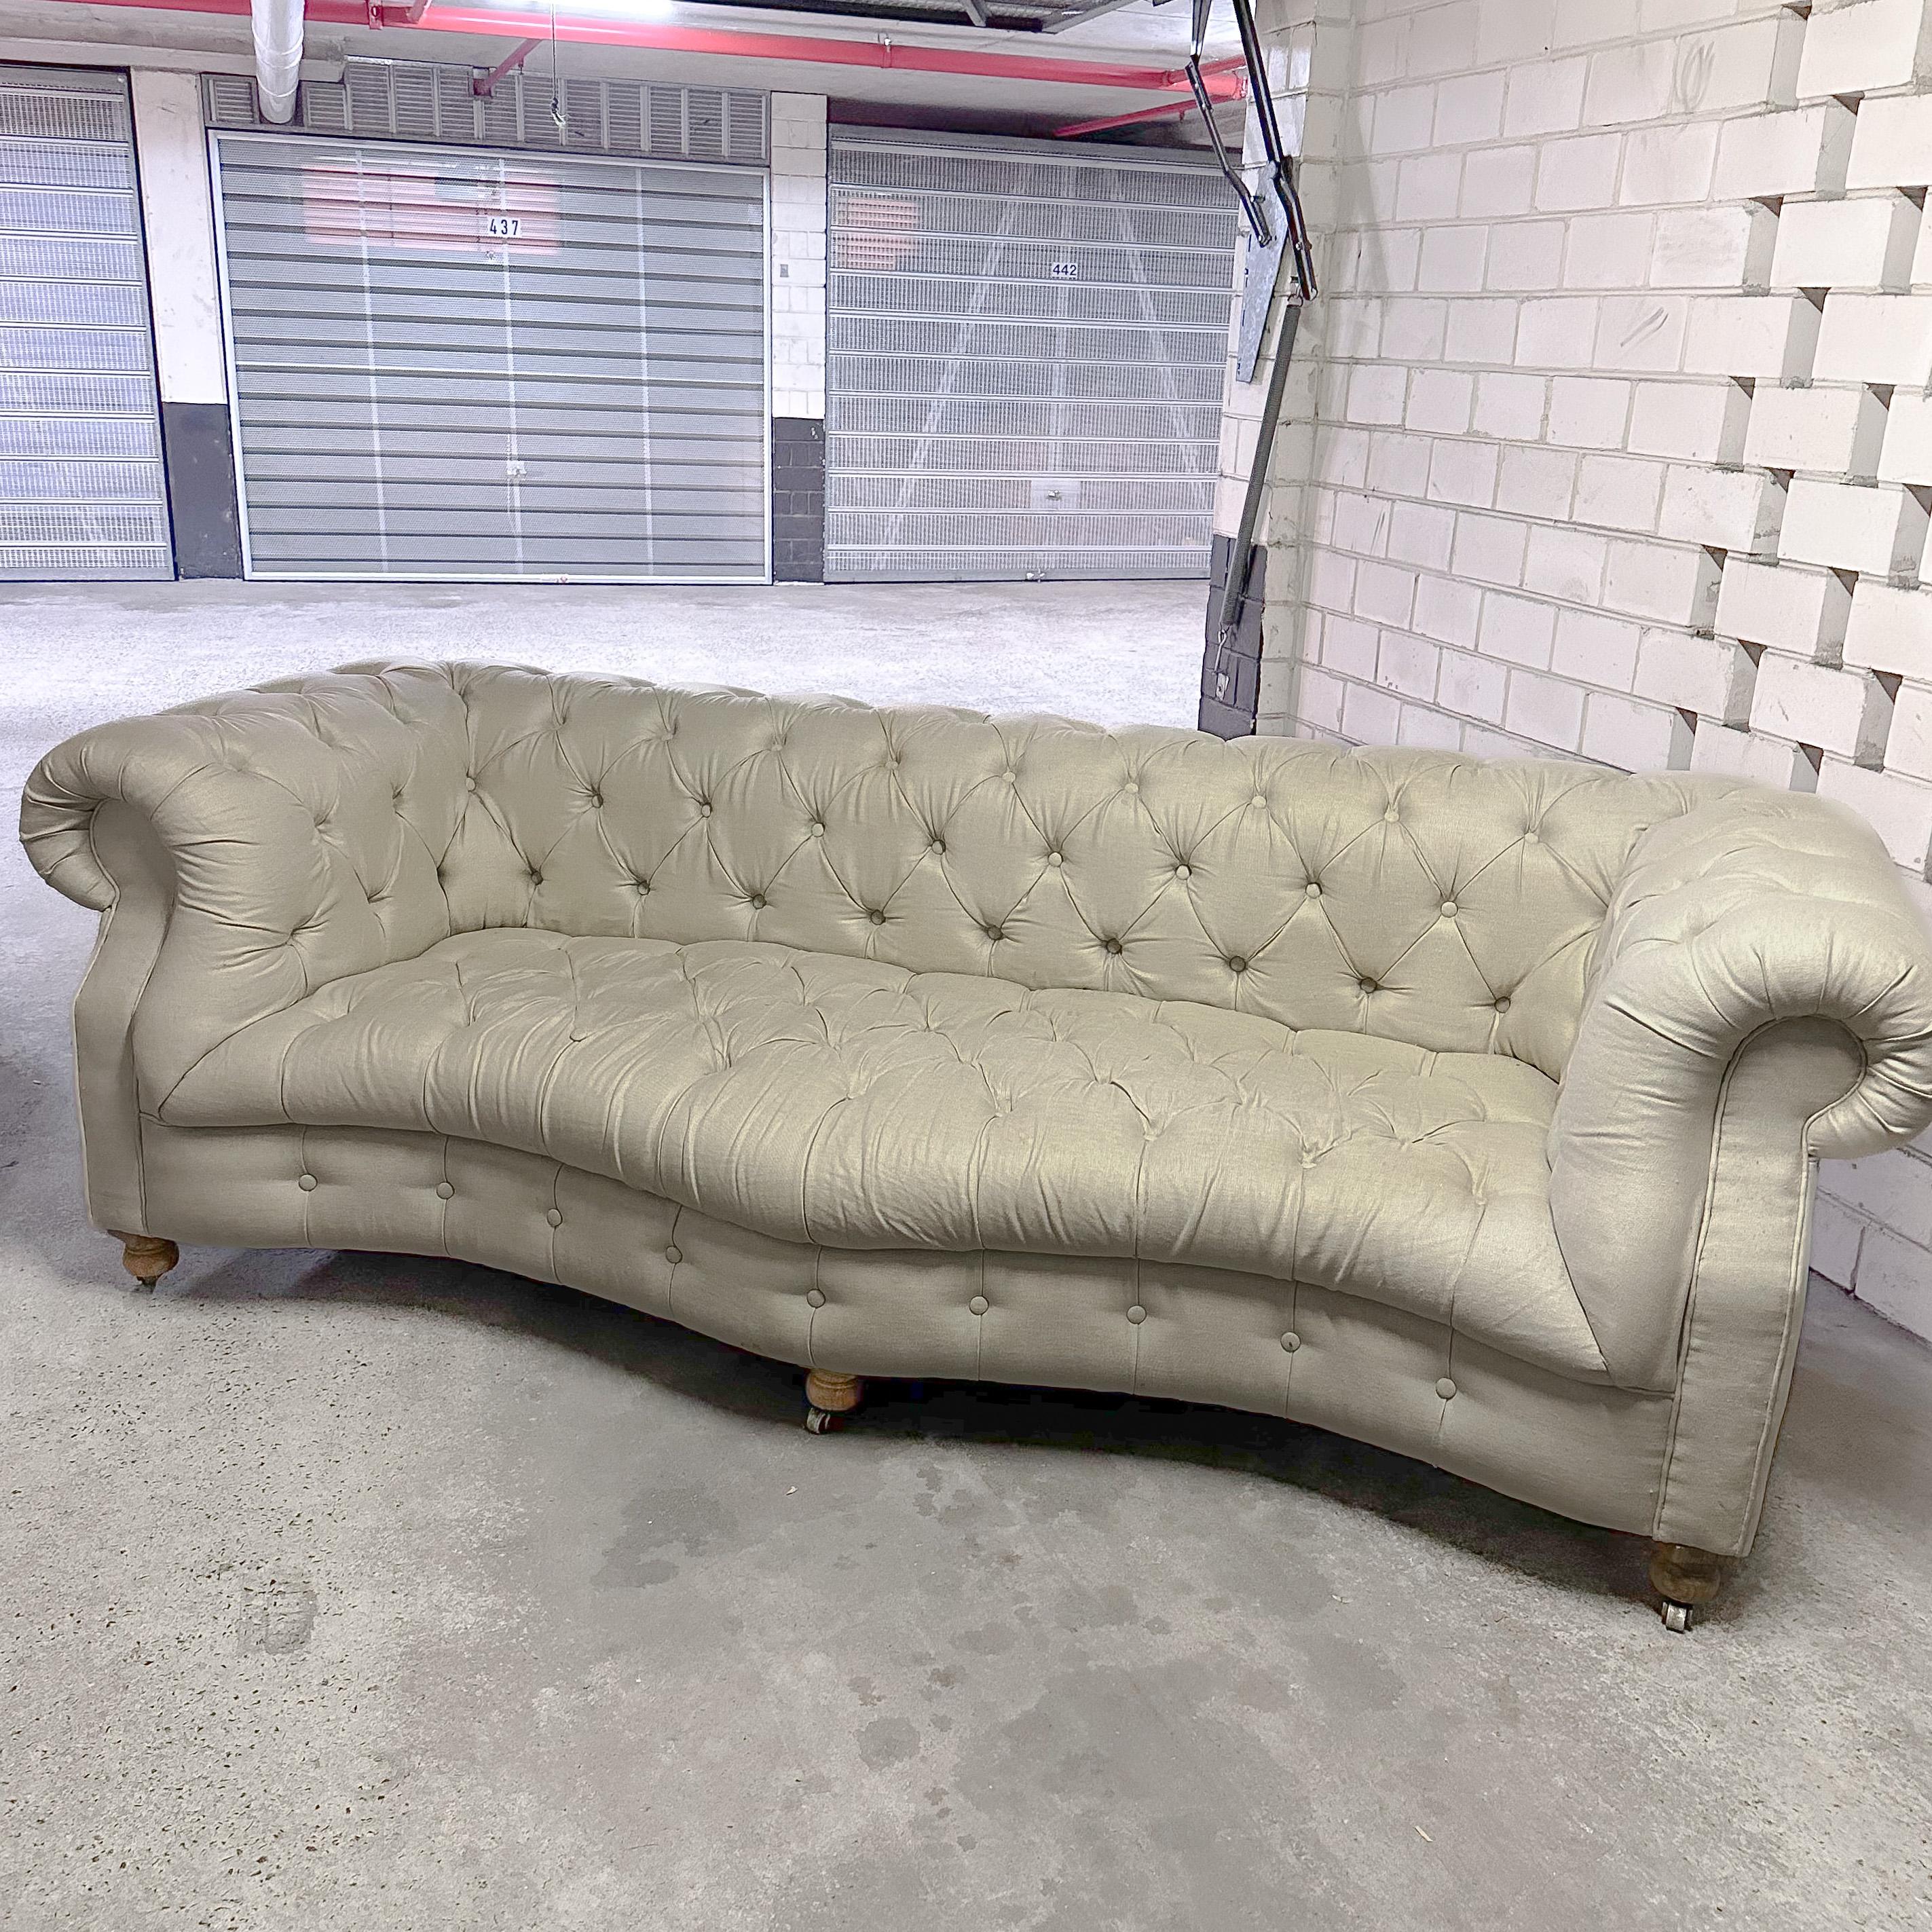 Timothy Oulton Serpentine sofa. Fully buttoned-up Chesterfield style with elegant contours and classic hand-tufting.

Named after the Serpentine river in England, due to its languid curve of the front seat which lends a softer, more feminine